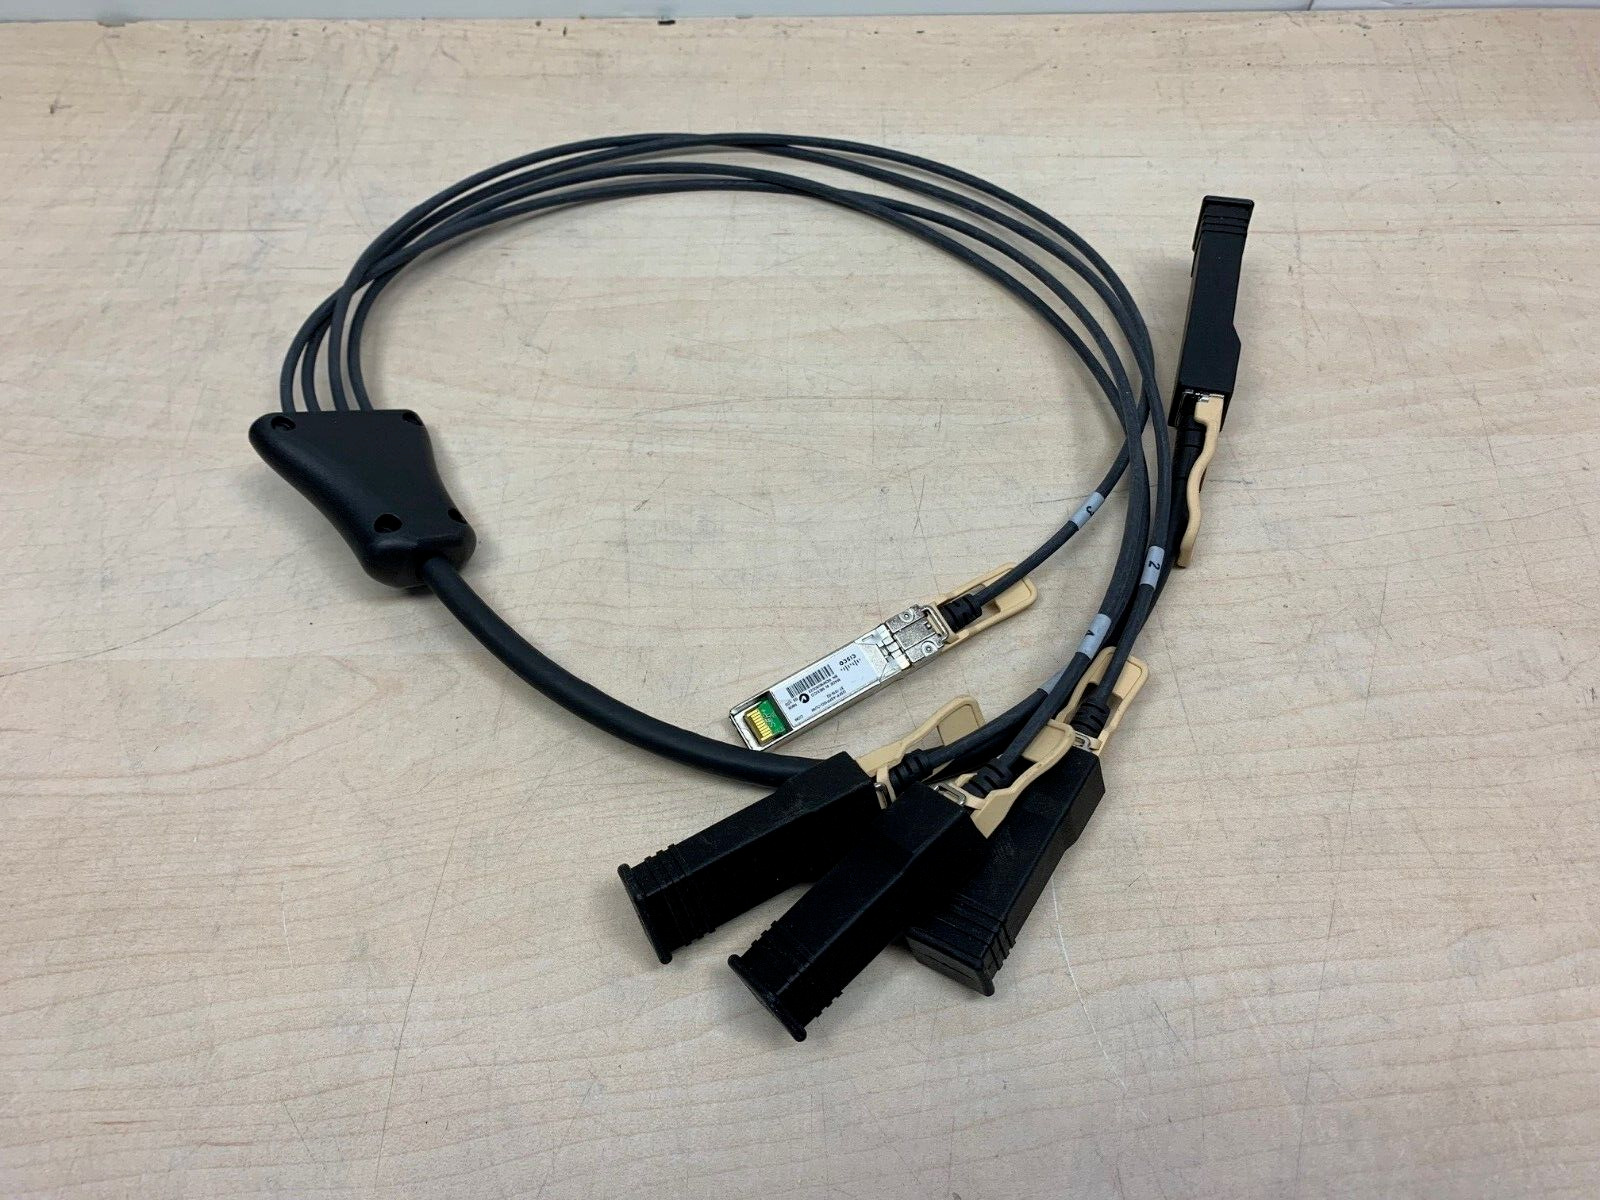 1m/3ft Cisco QSFP-4SFP10G-CU1M 40G QSFP+ to 4x SFP+ Breakout DAC Cable